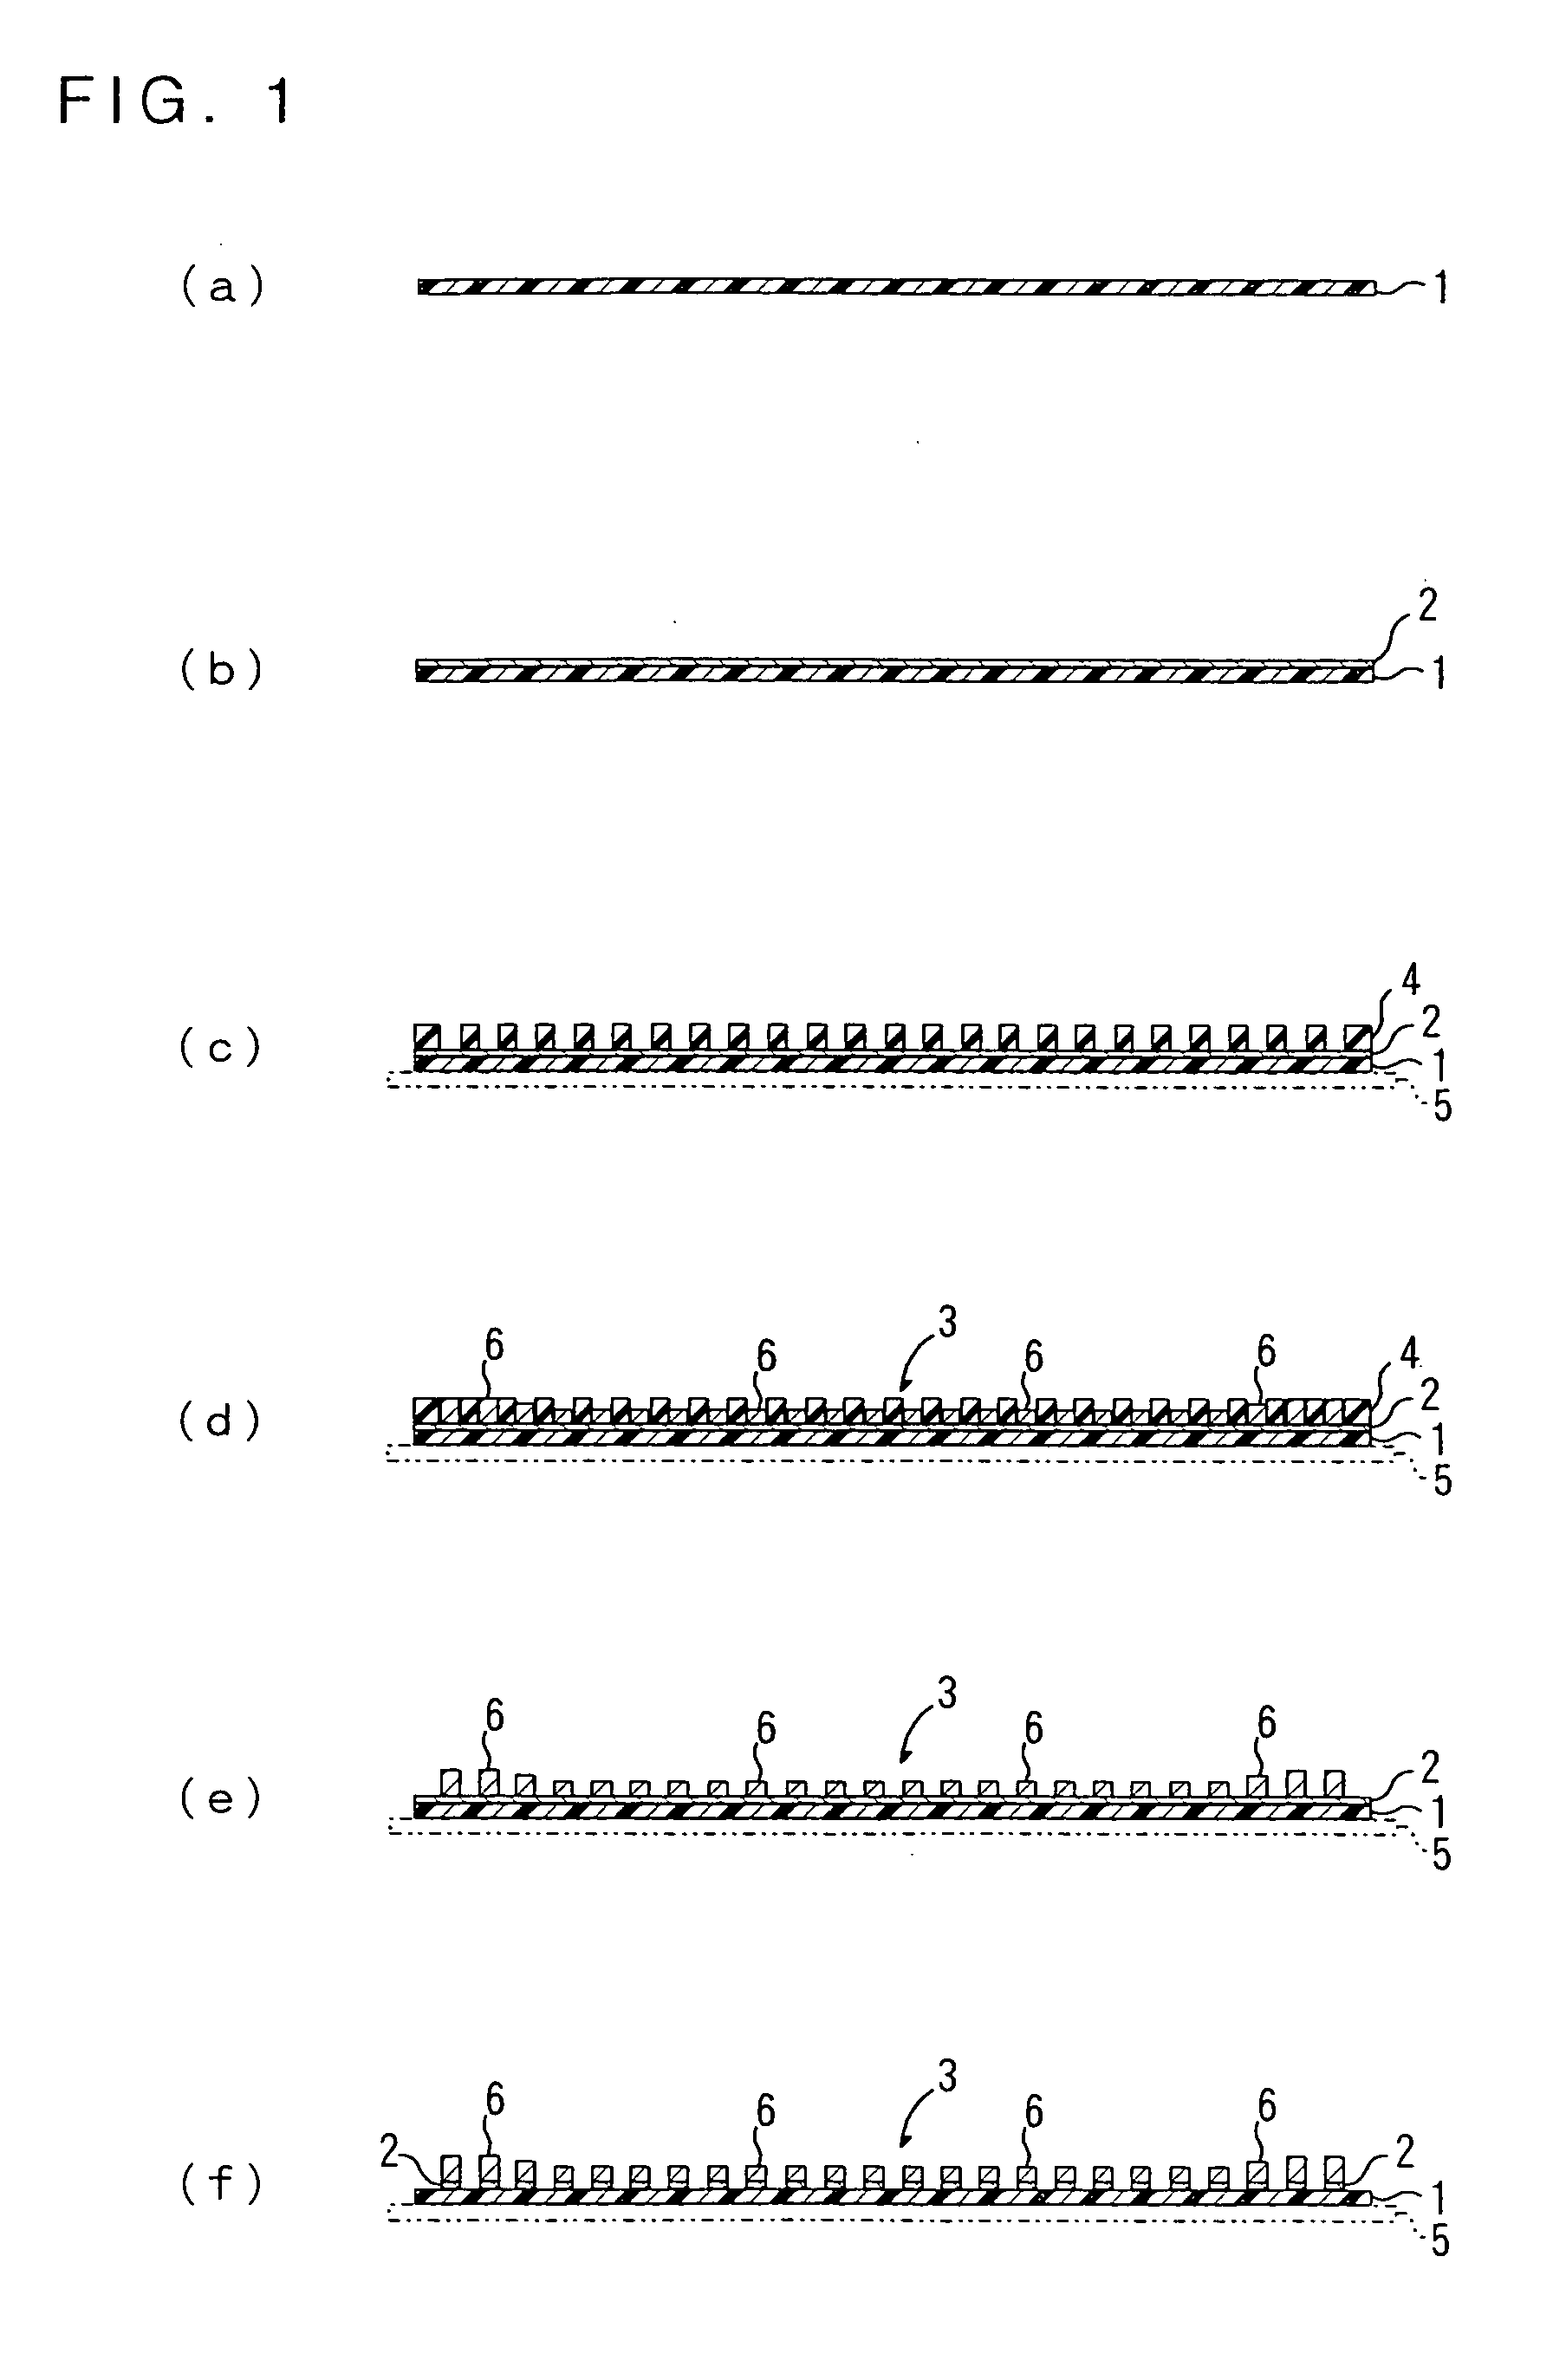 Producing method of flexible wired circuit board